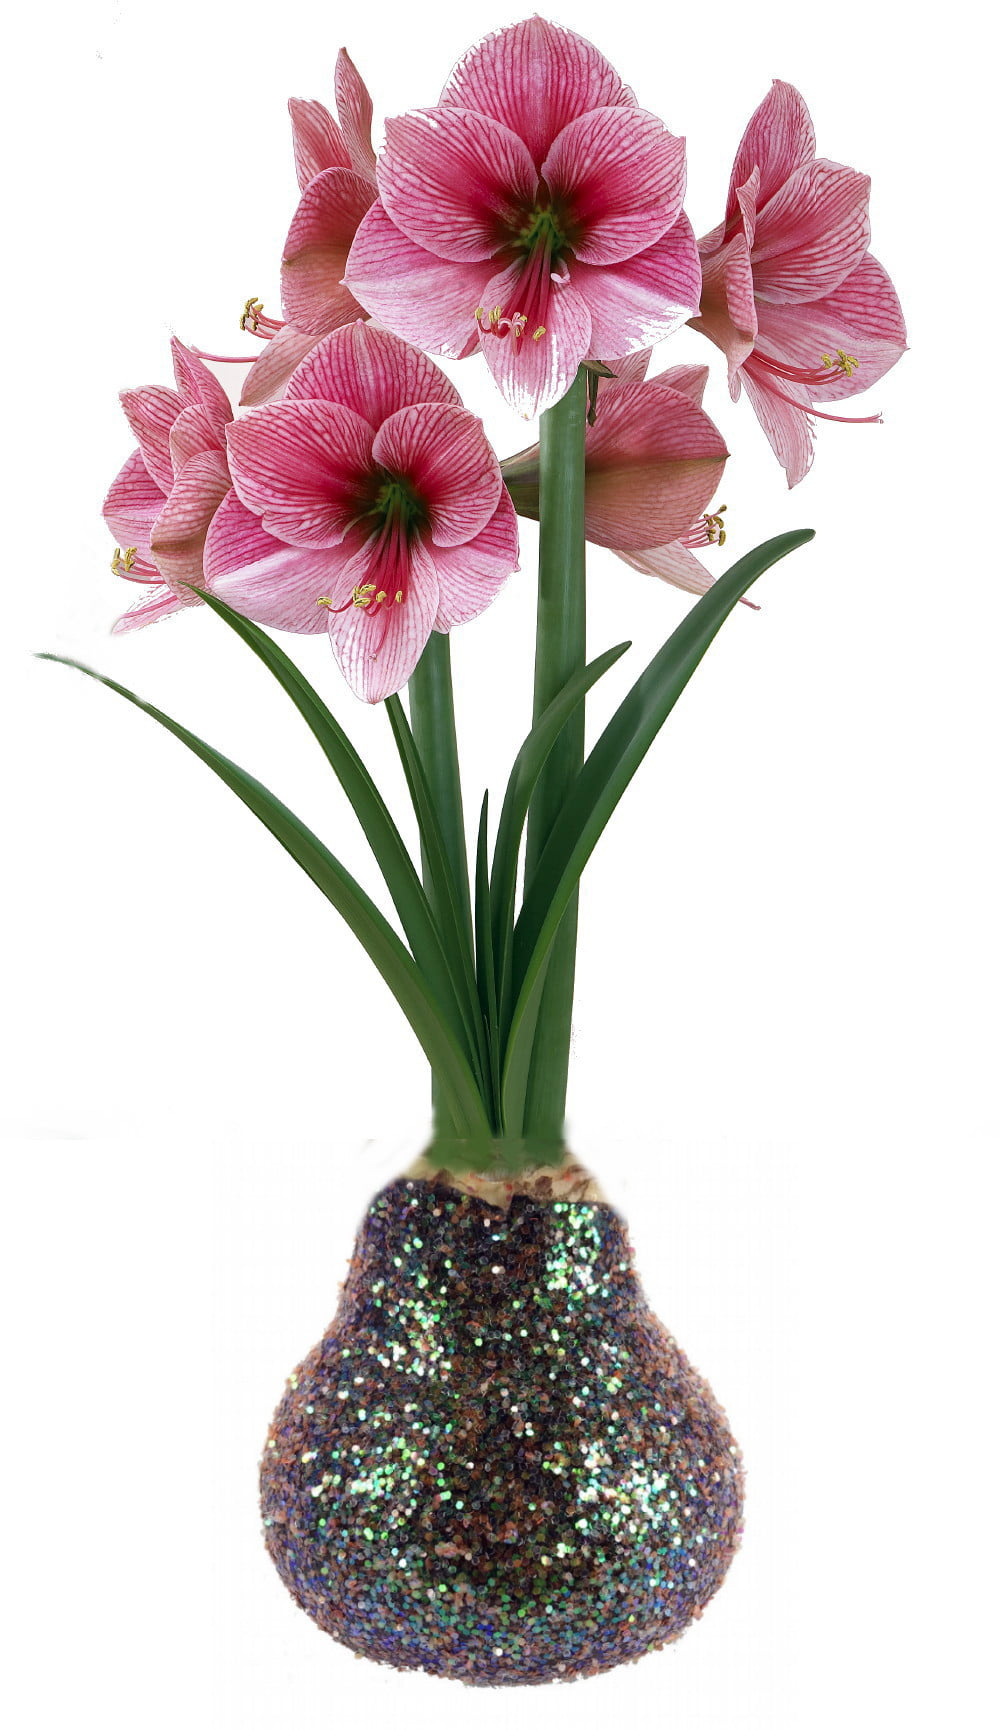 Details about   Amaryllis Bulb Standing Snowman Glitter Dipped Waxed Blooms Without Soil/Water 